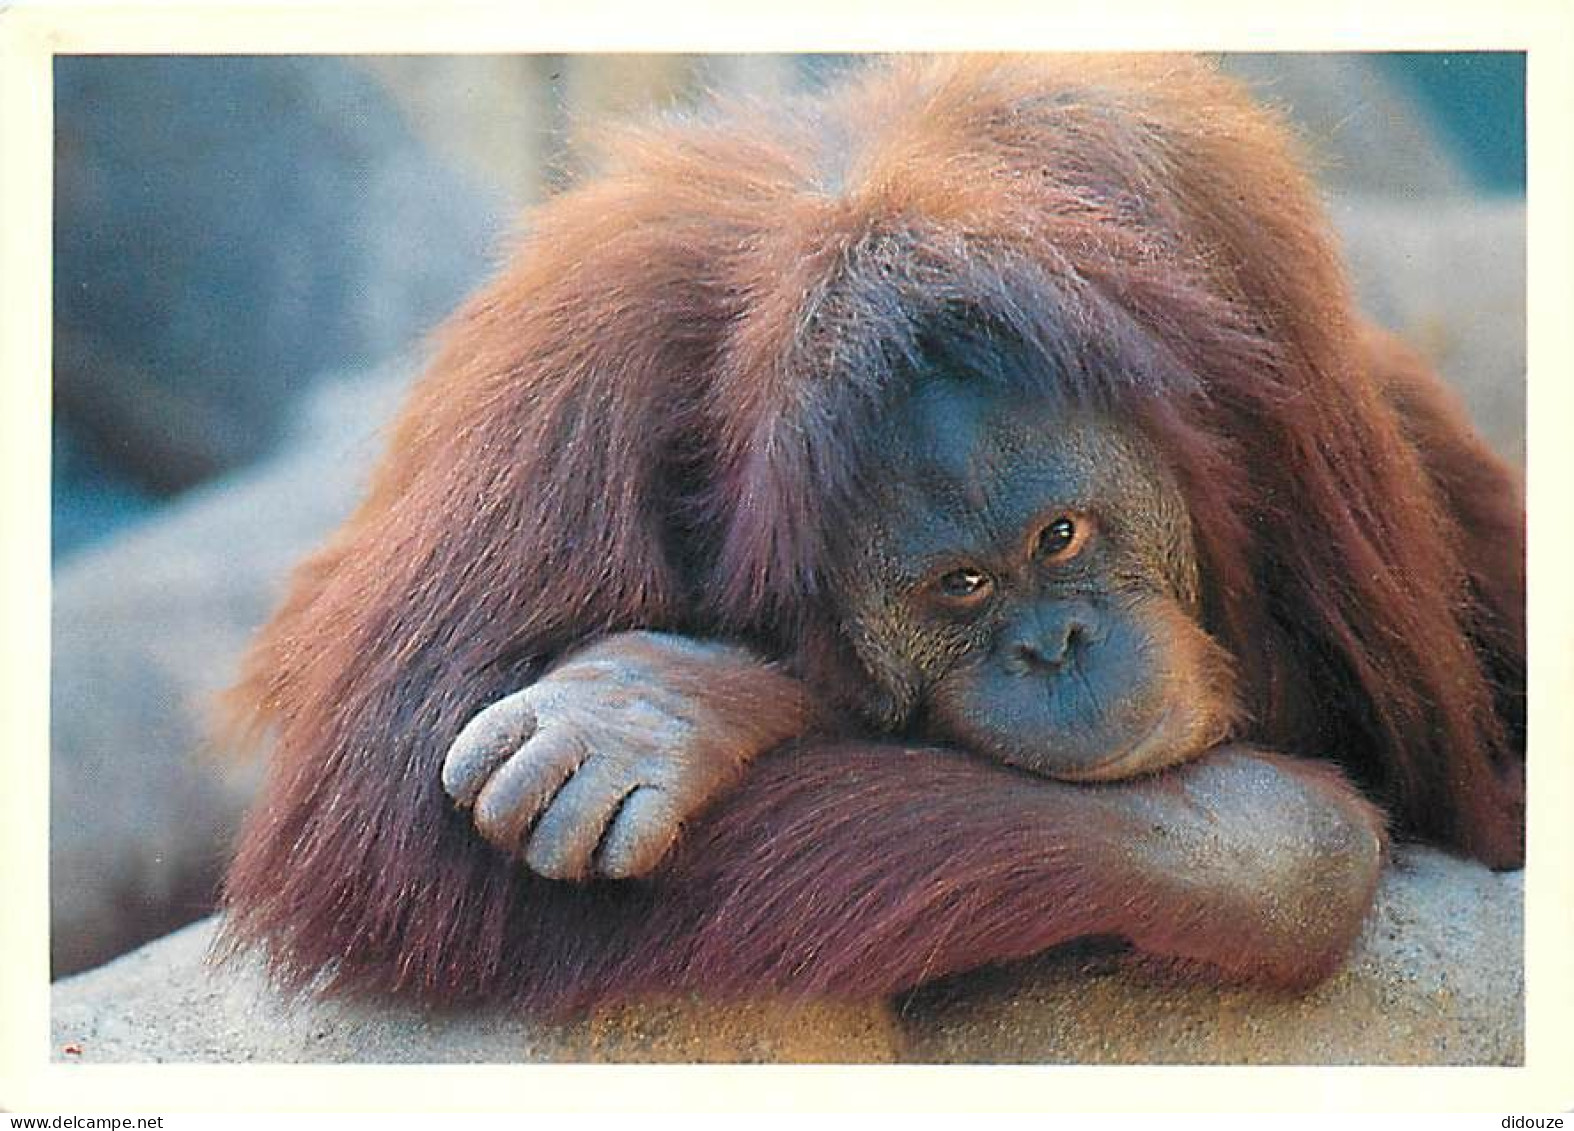 Animaux - Singes - Collection Vie Sauvage - 40 - Orang-Outang - CPM - Voir Scans Recto-Verso - Monkeys